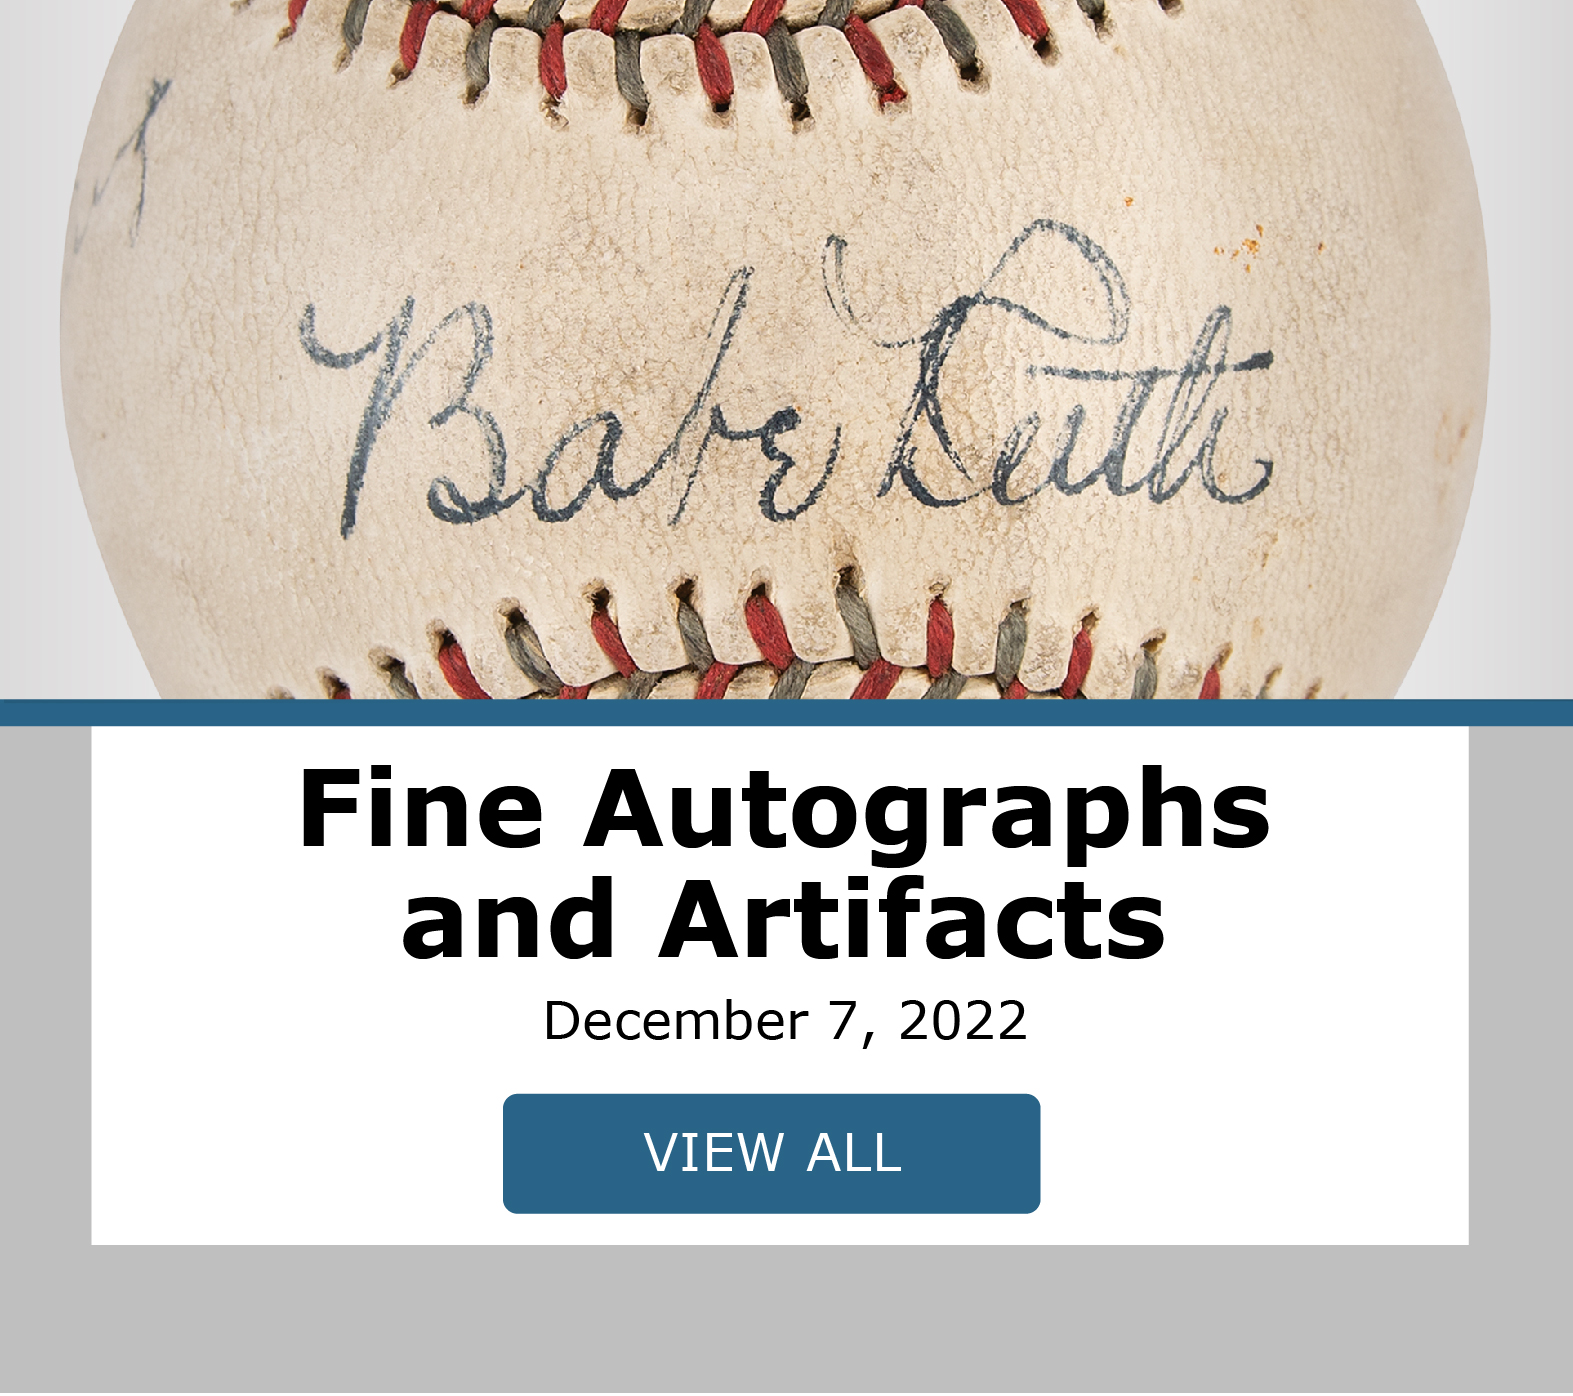 649 December Auction Featuring Animation and Sports Cards Closes December 7, 2022. Bid Now!